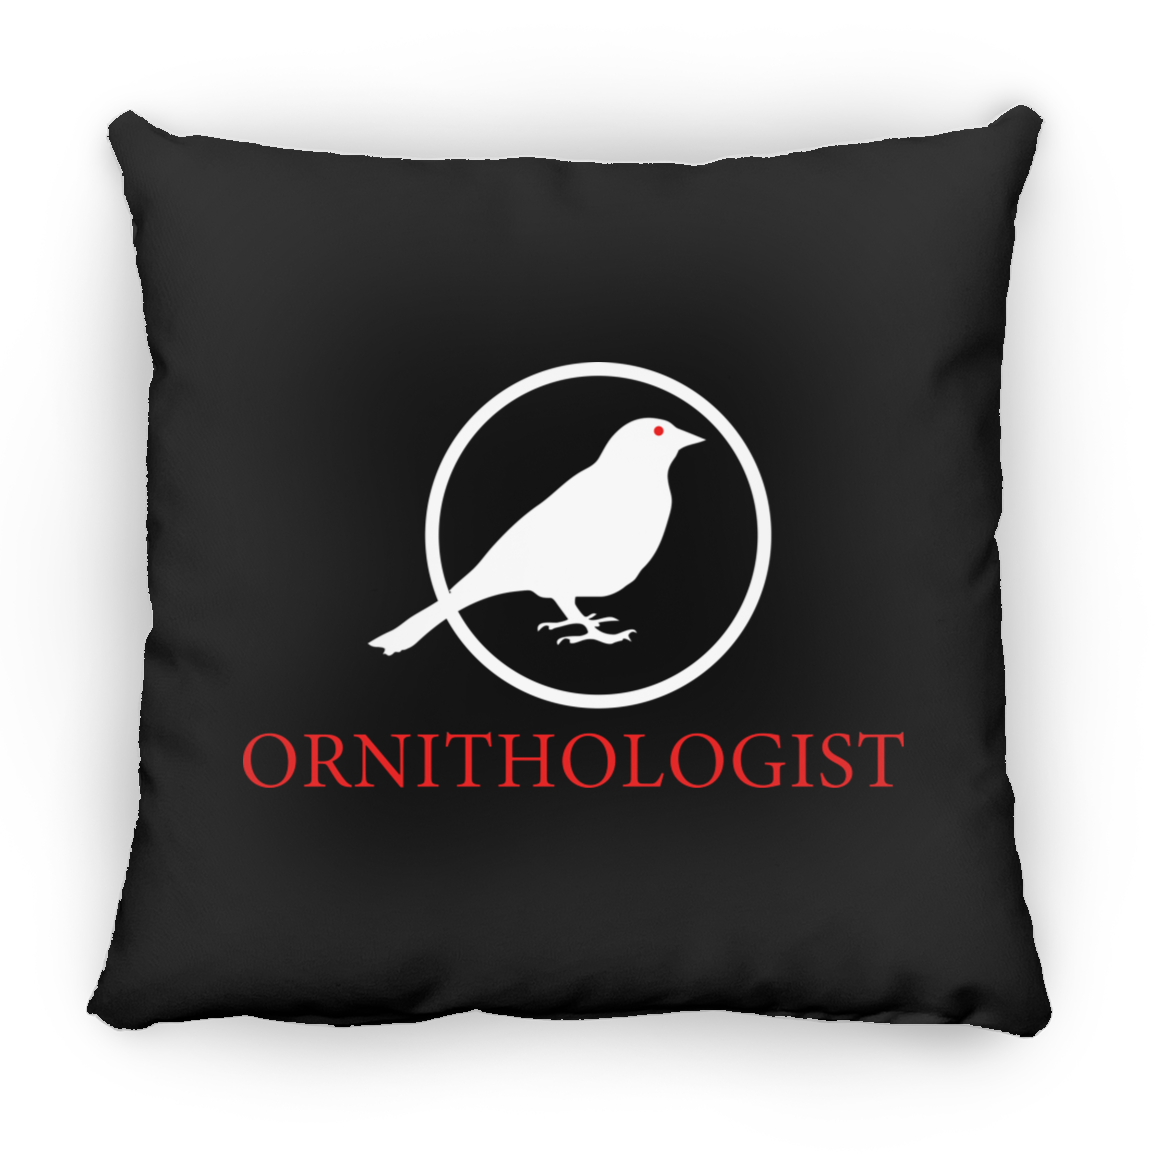 OPG Custom Design #24. Ornithologist. A person who studies or is an expert on birds. Square Pillow 18x18